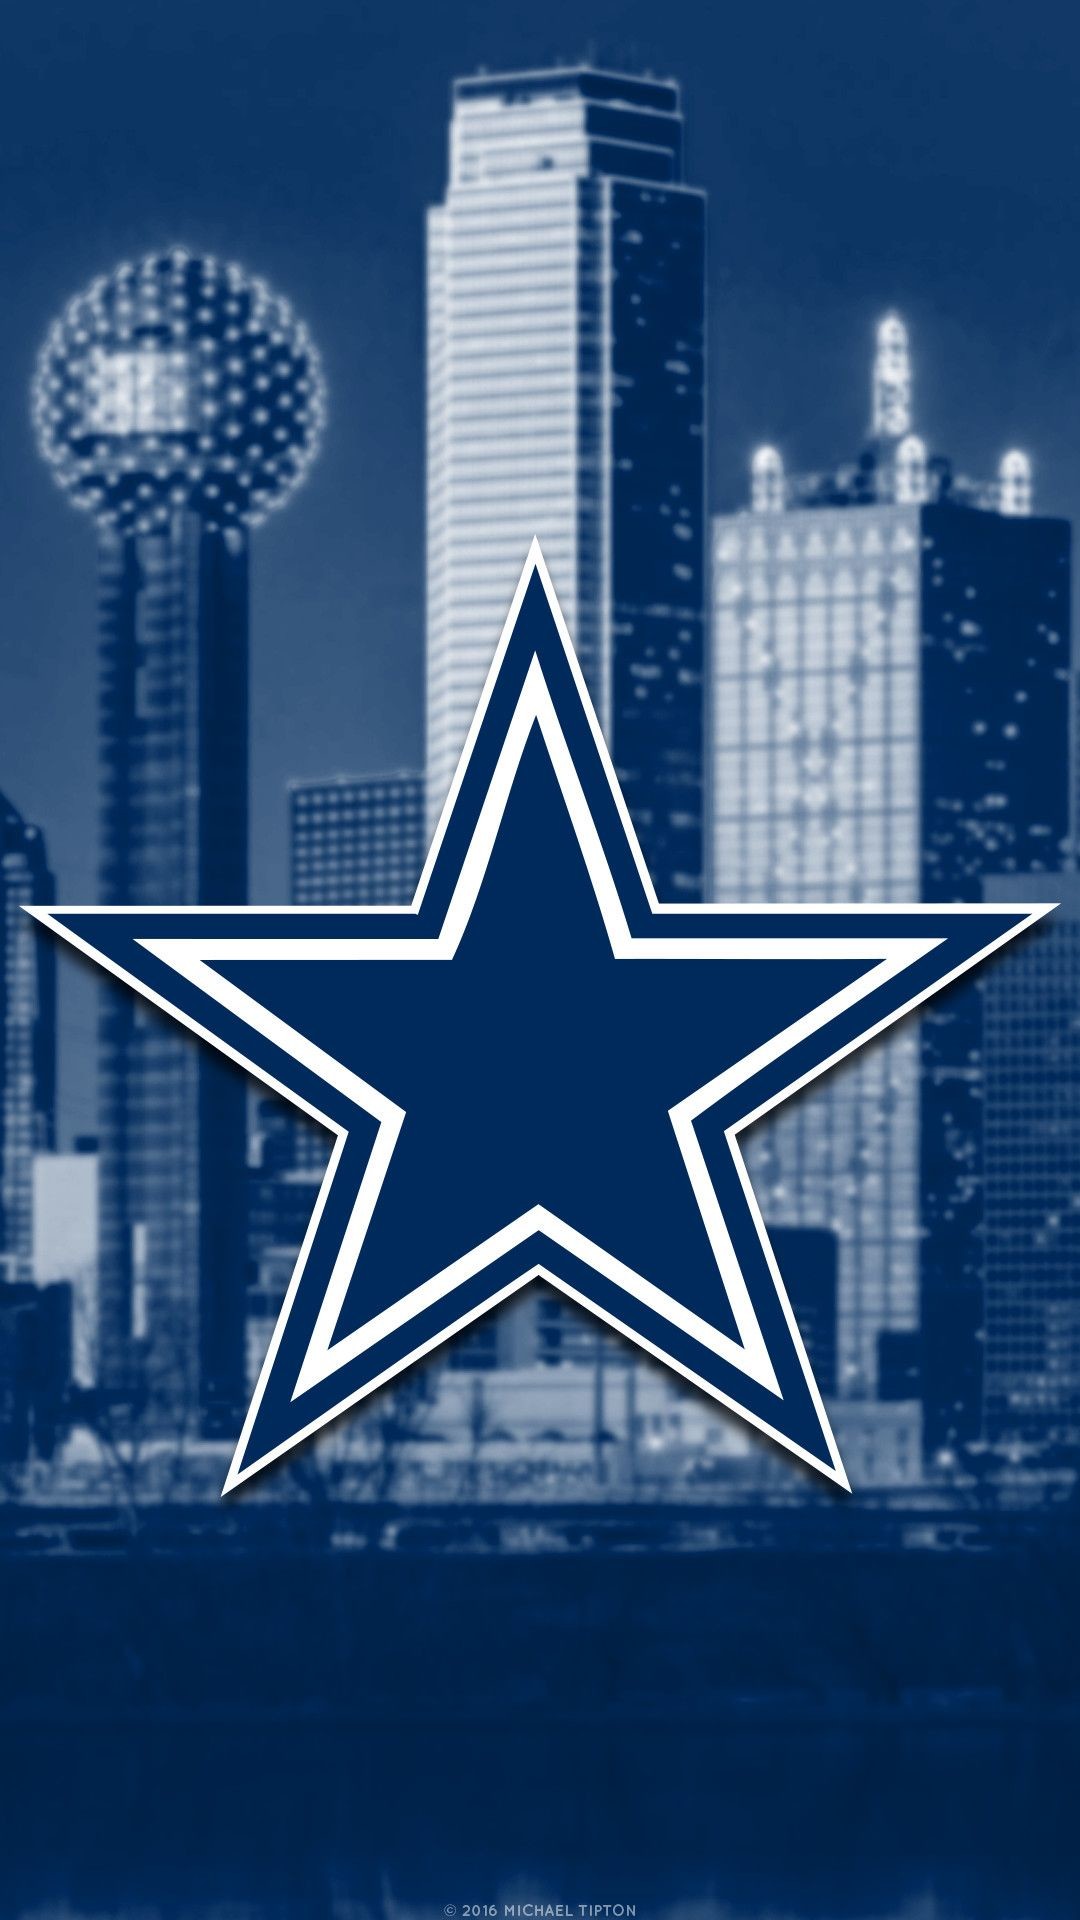 1080x1920 Dallas Cowboys Iphone Wallpaper 25+ - Page 3 of 3 - easylife-online.